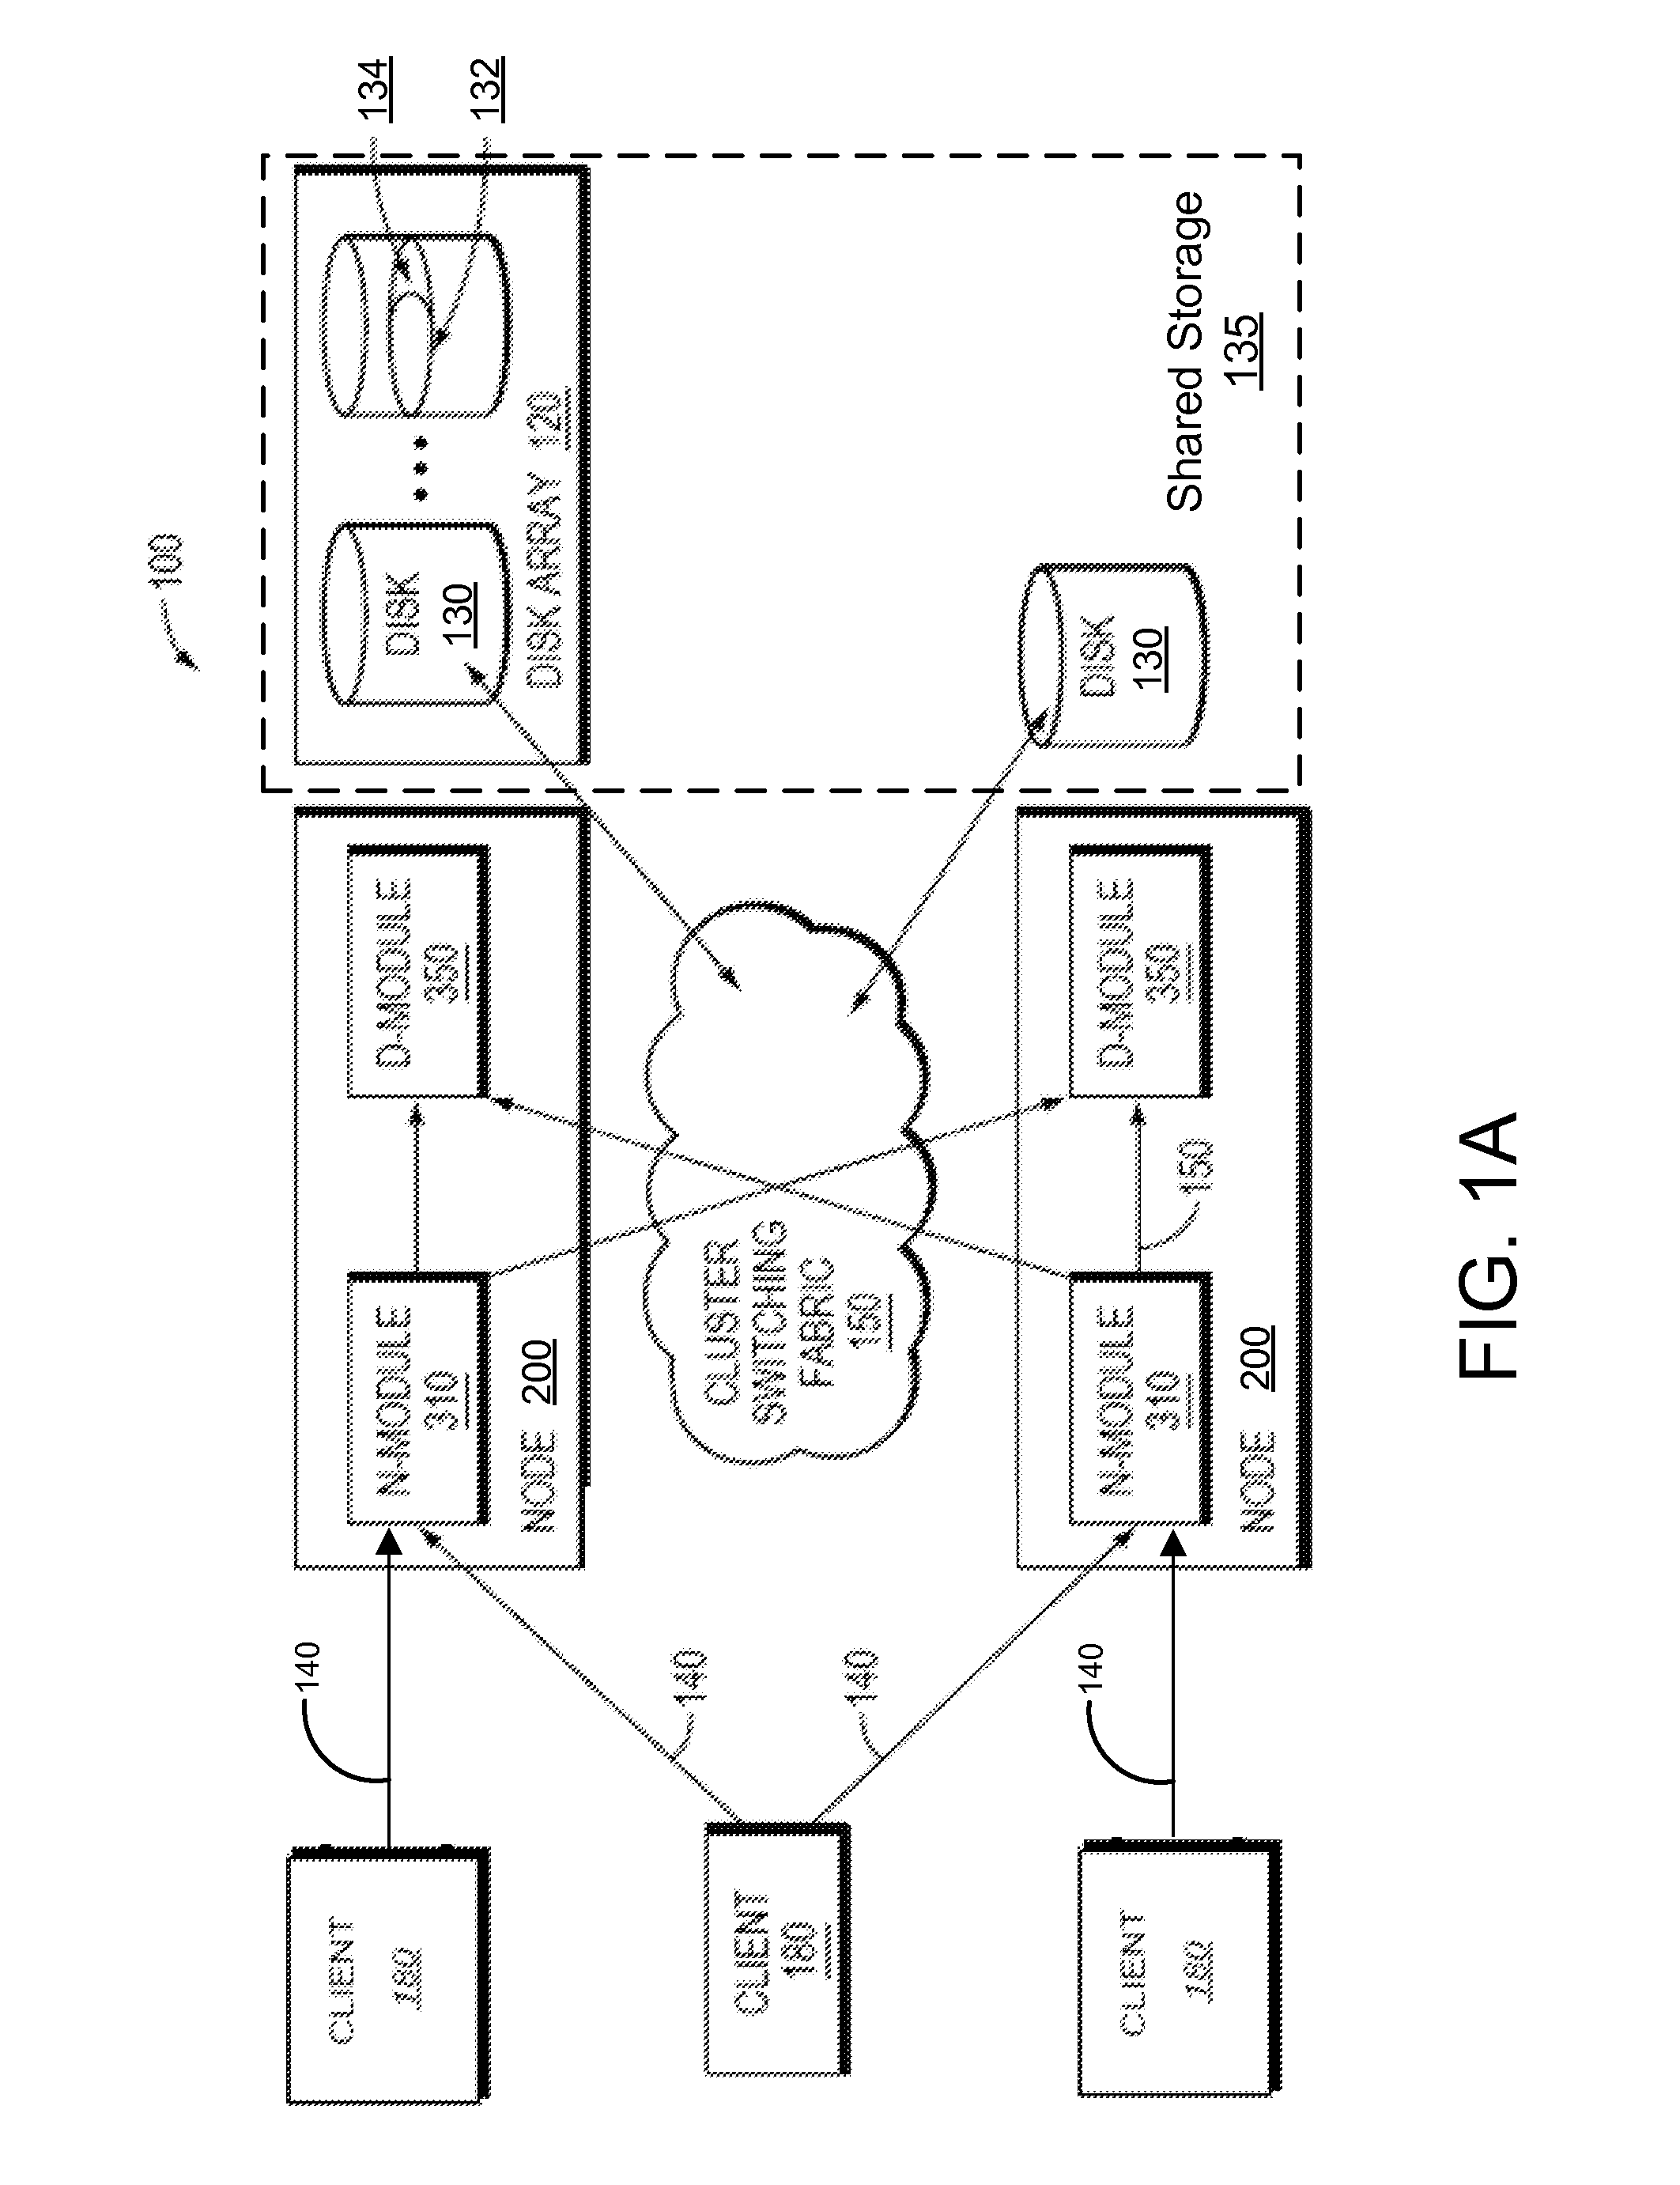 Global write-log device for managing write logs of nodes of a cluster storage system